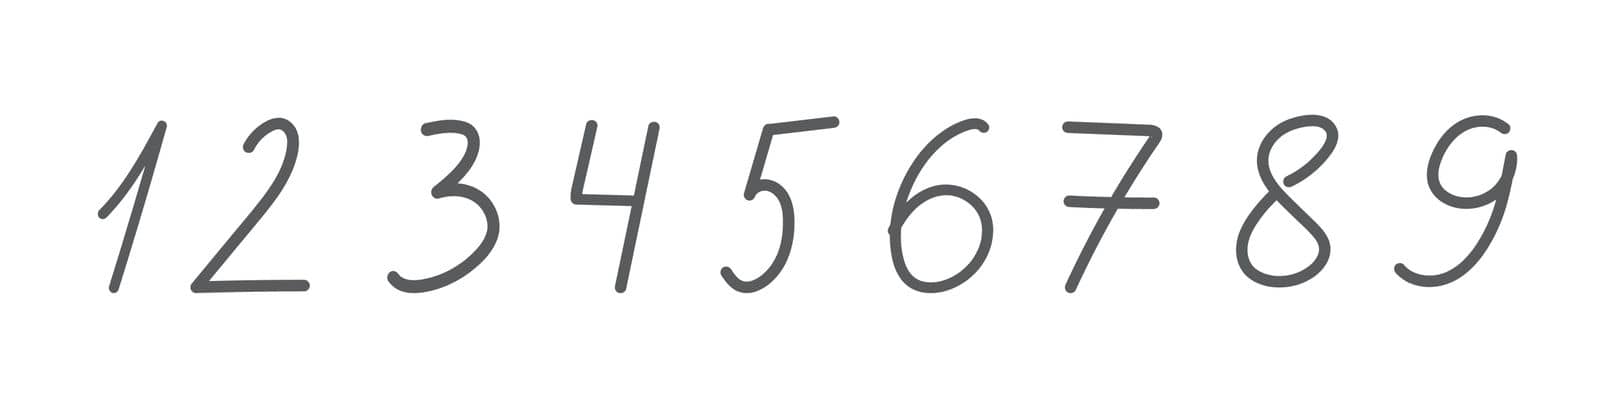 set of scribble numbers. figure numeric of doodle style vector illustration isolated on white background by vikalost